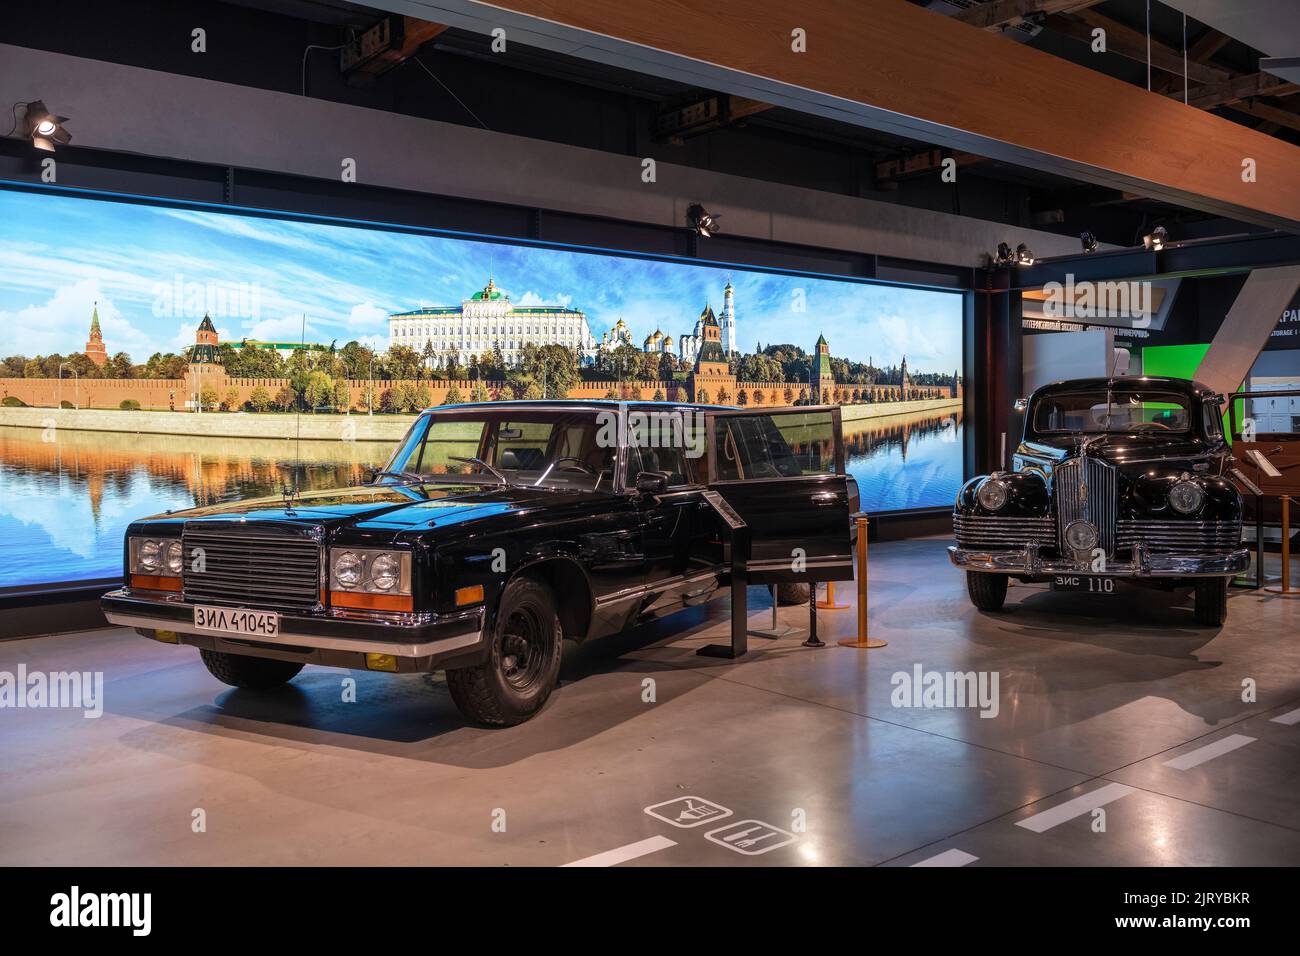 MOSCOW, RUSSIA - AUGUST 17, 2022: Two cars ZIS-110 and ZIL-41045 serving the top leadership of the Soviet Union in the exposition of the Museum Stock Photo